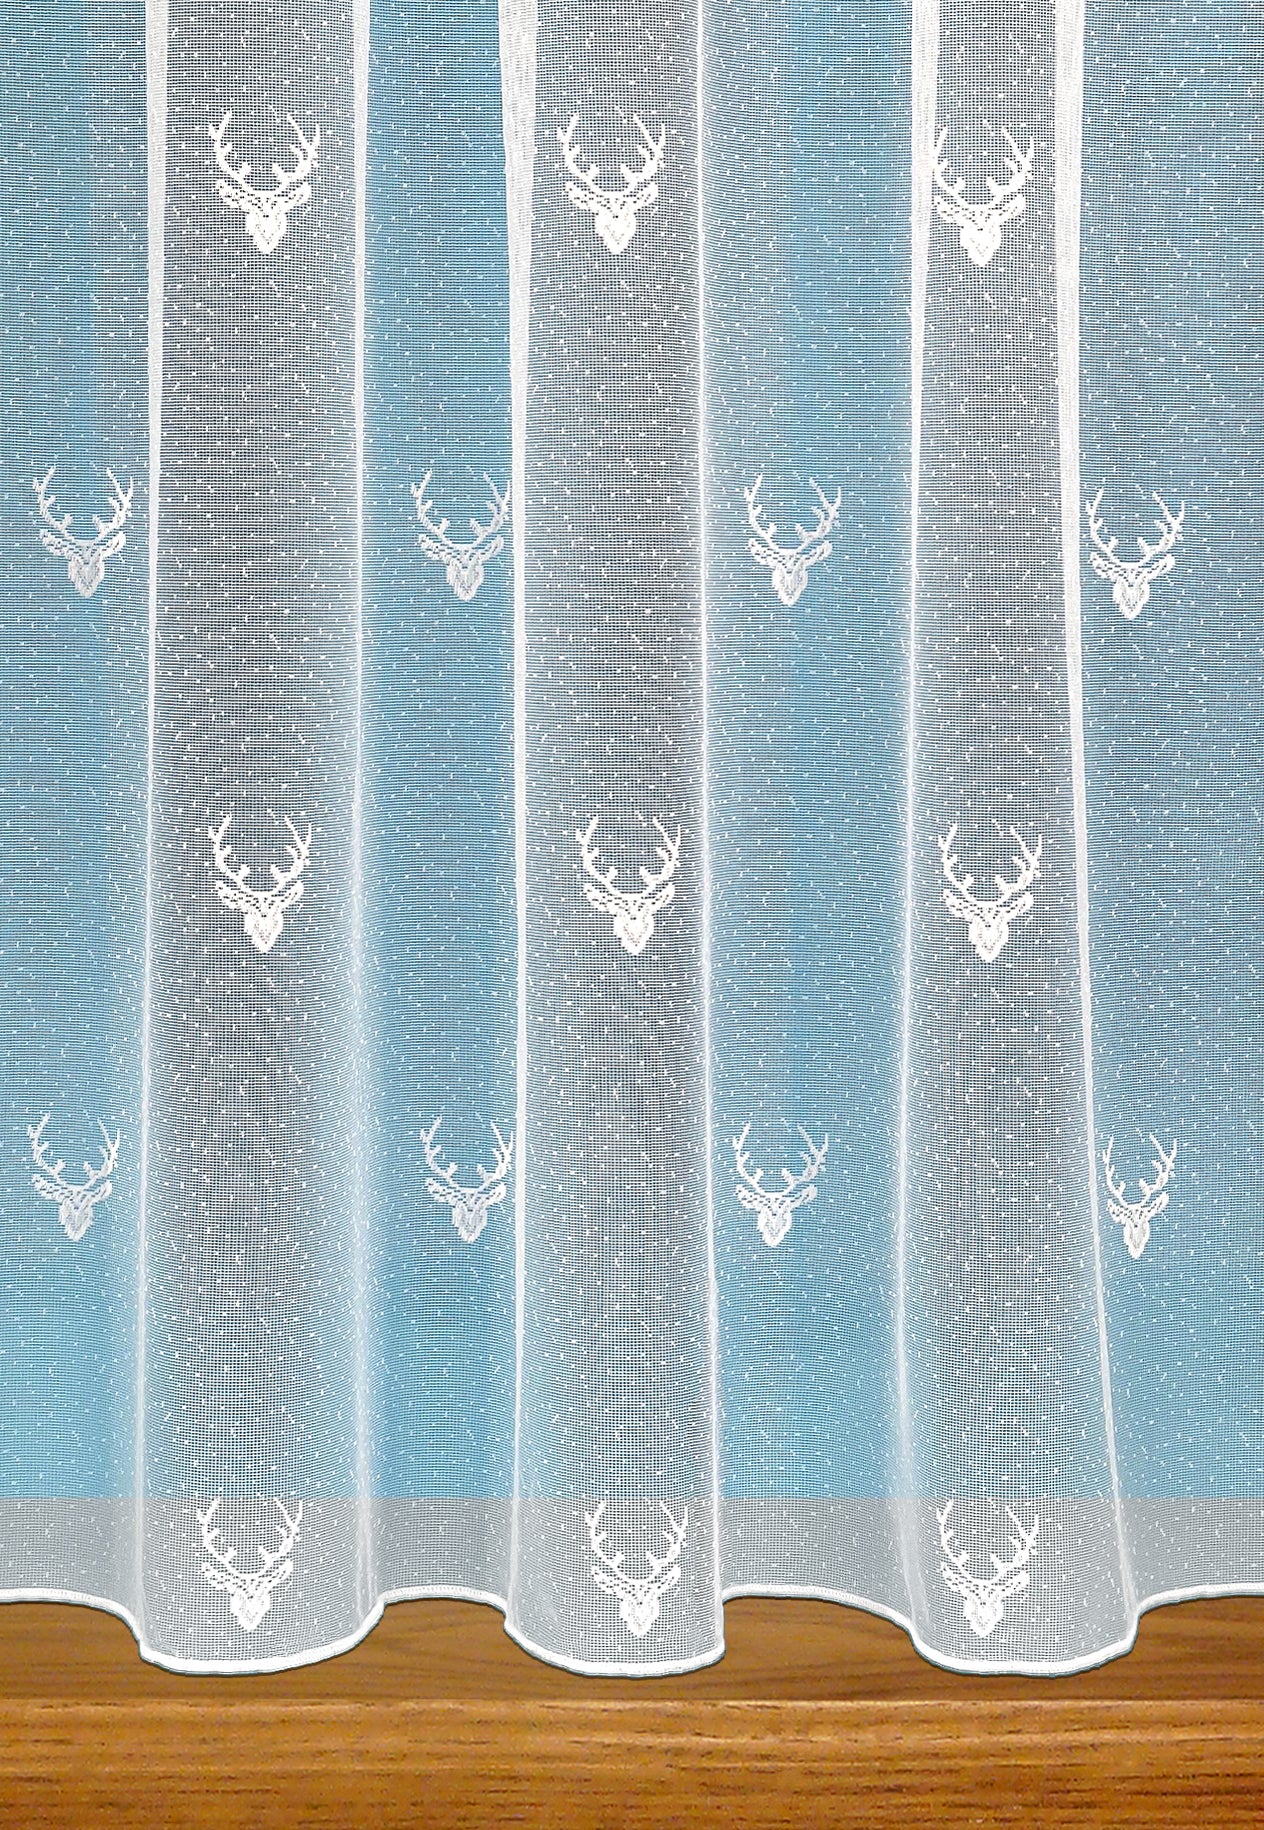 Balmoral Stag Design Net Curtains